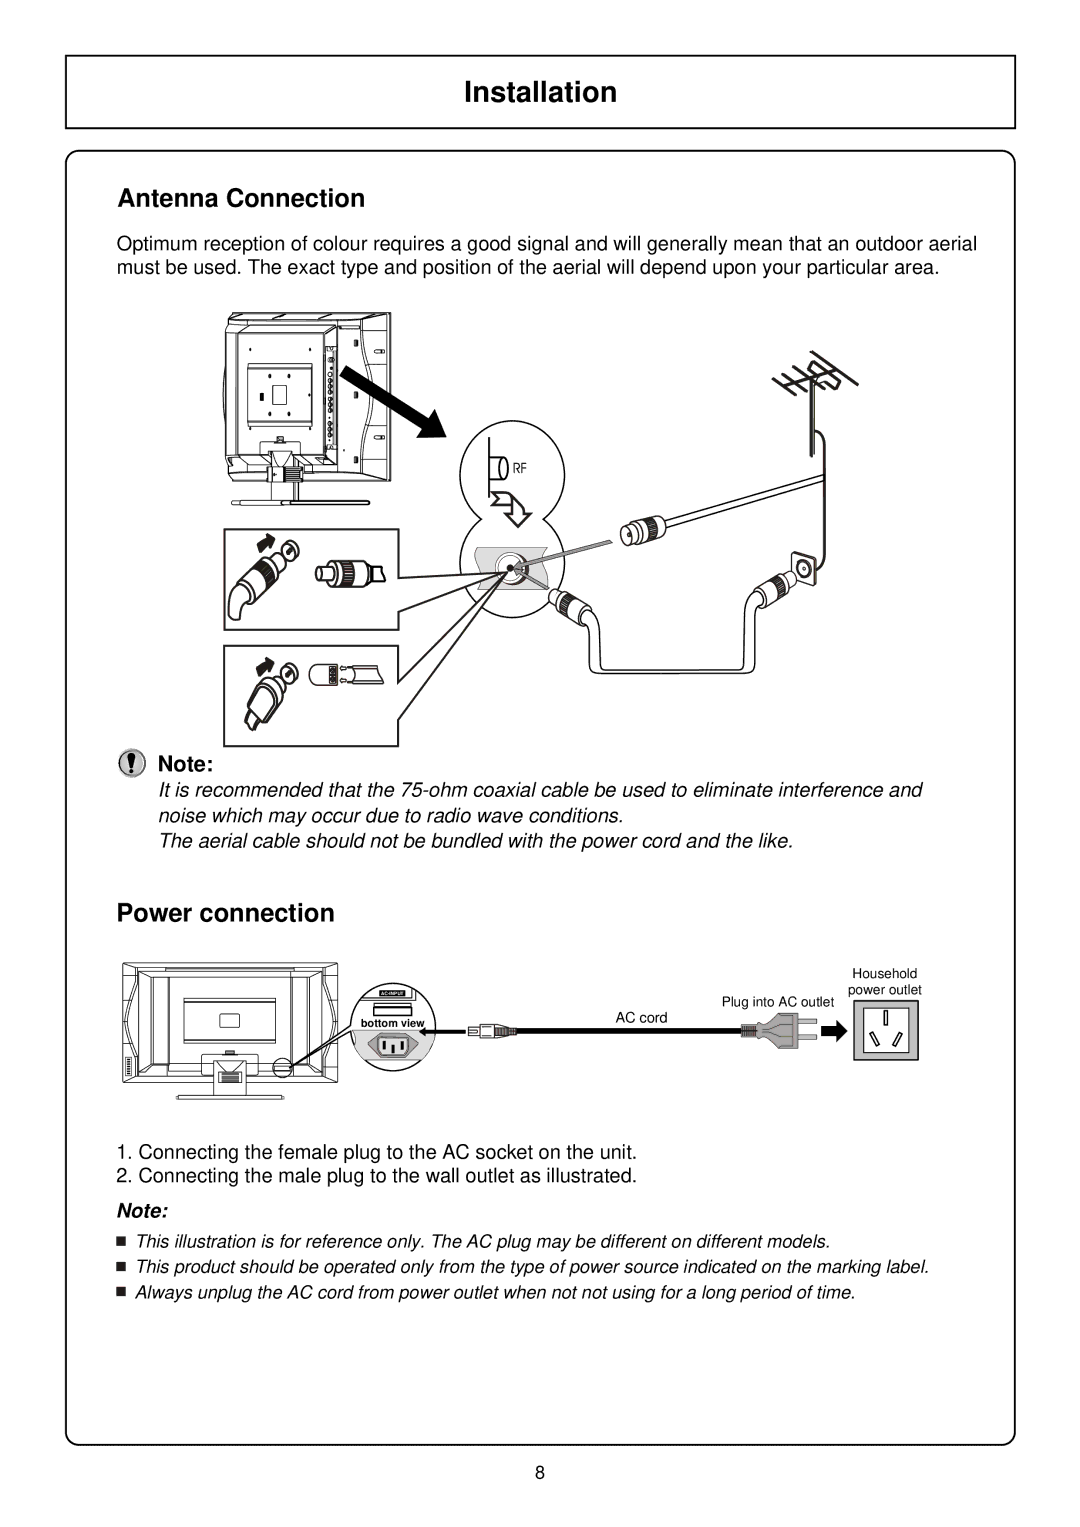 Palsonic TFTV580 owner manual Installation, Antenna Connection, Power connection 